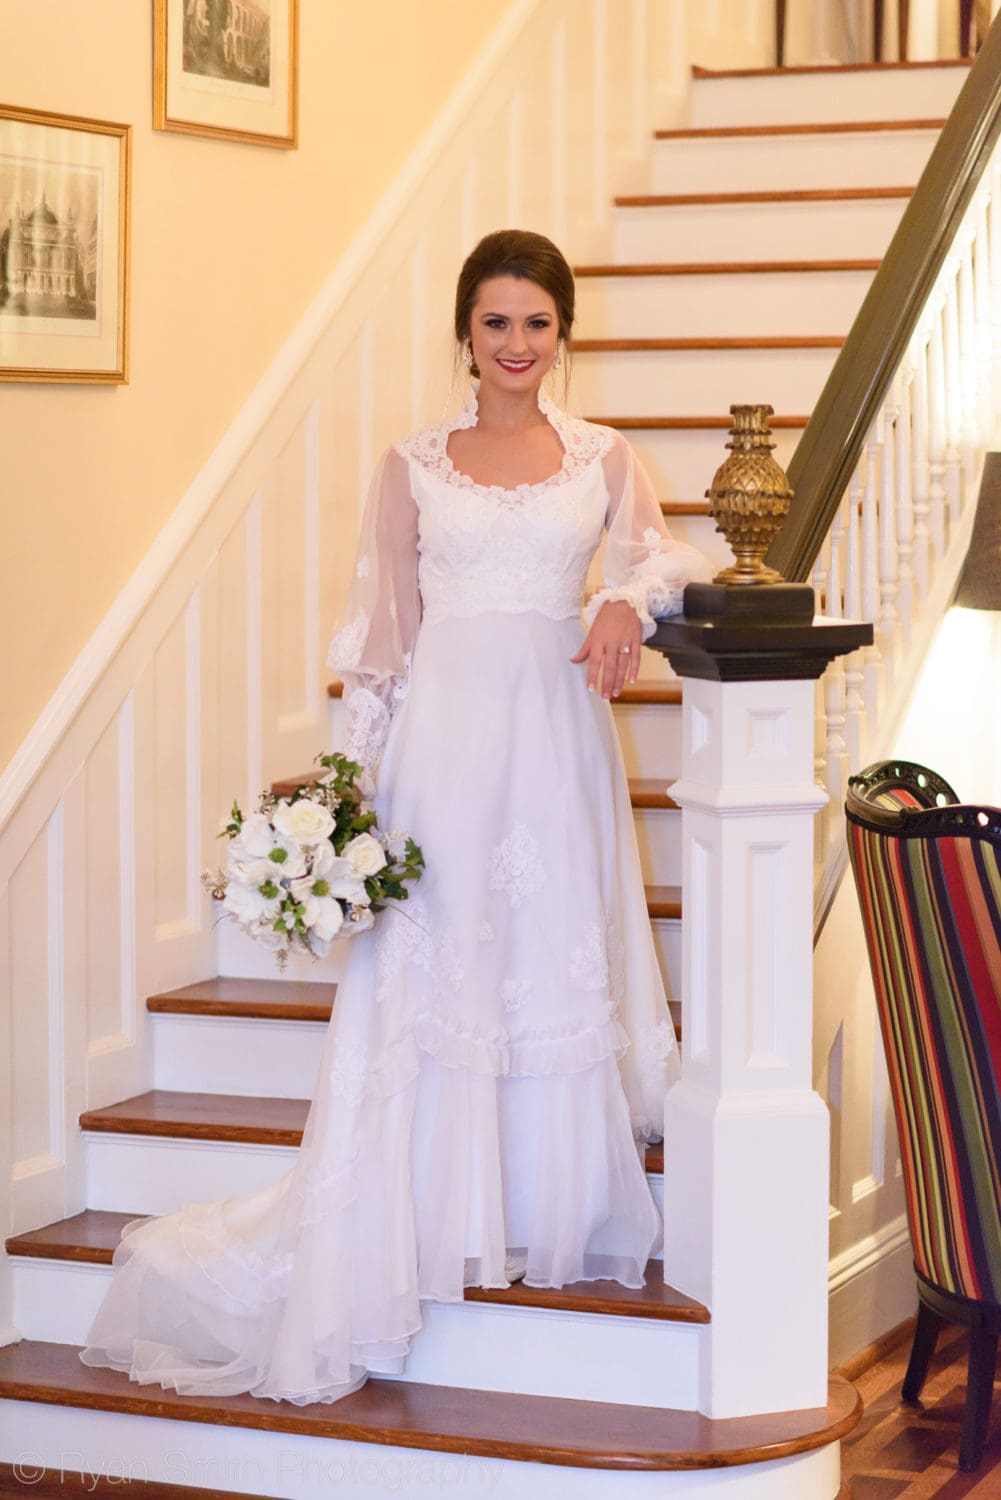 Bride in mothers dress - Rosewood Manor, Marion